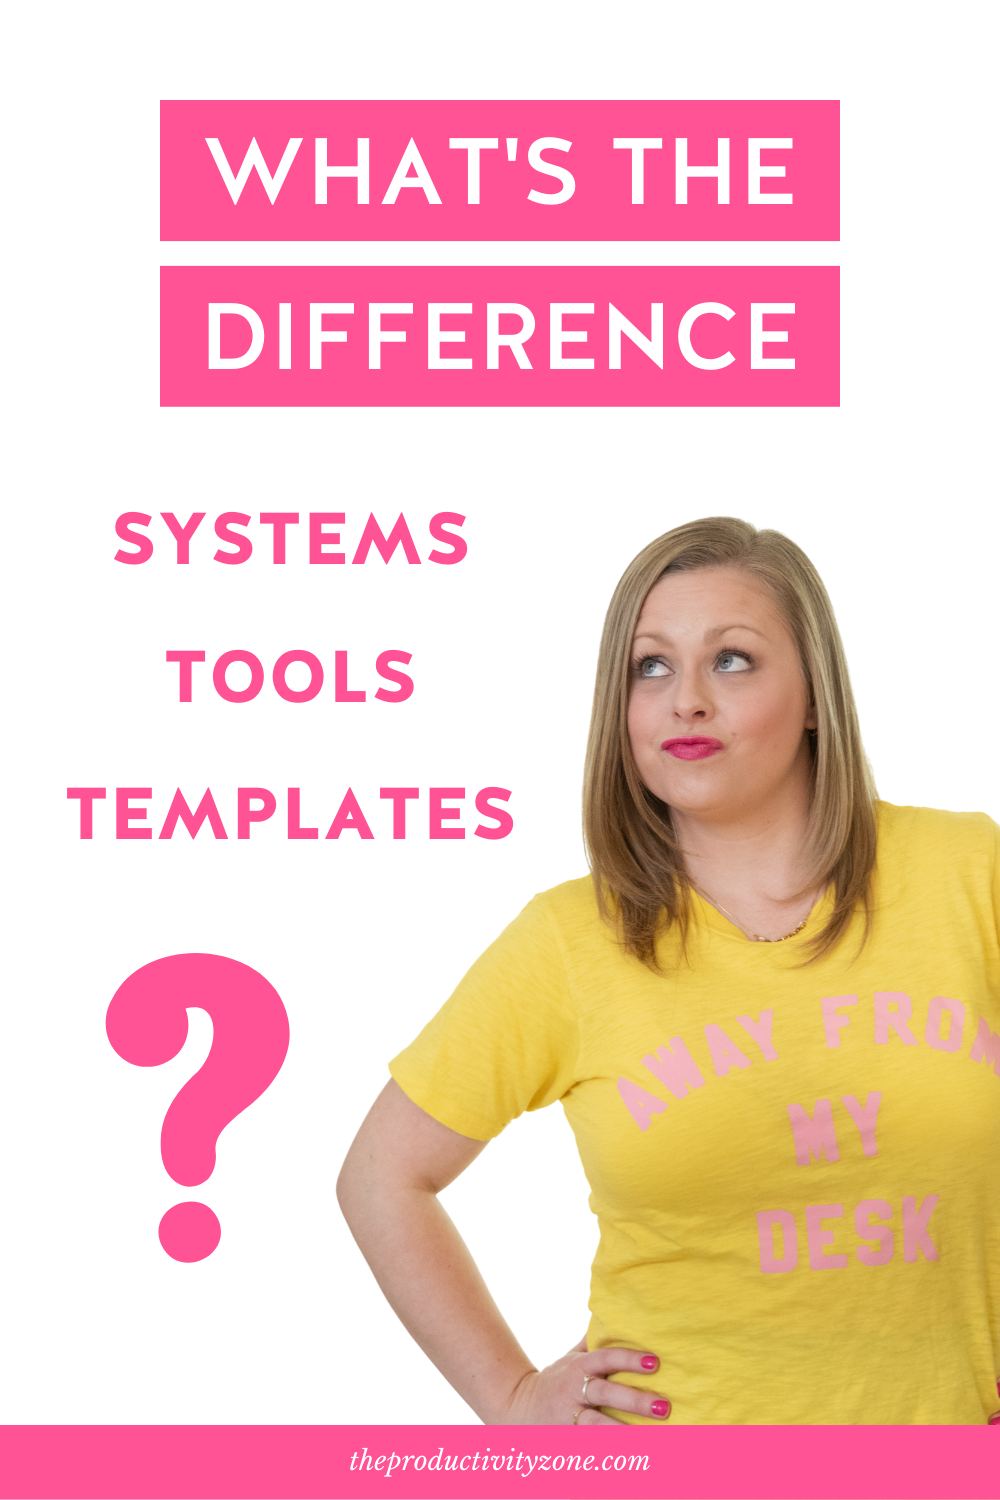 Text graphic featuring hot pink text on a white background with a girl in a yellow shirt giving the text a sassy look. The text reads: What's the Difference - Systems Tools Templates" with a giant hot pink question mark.